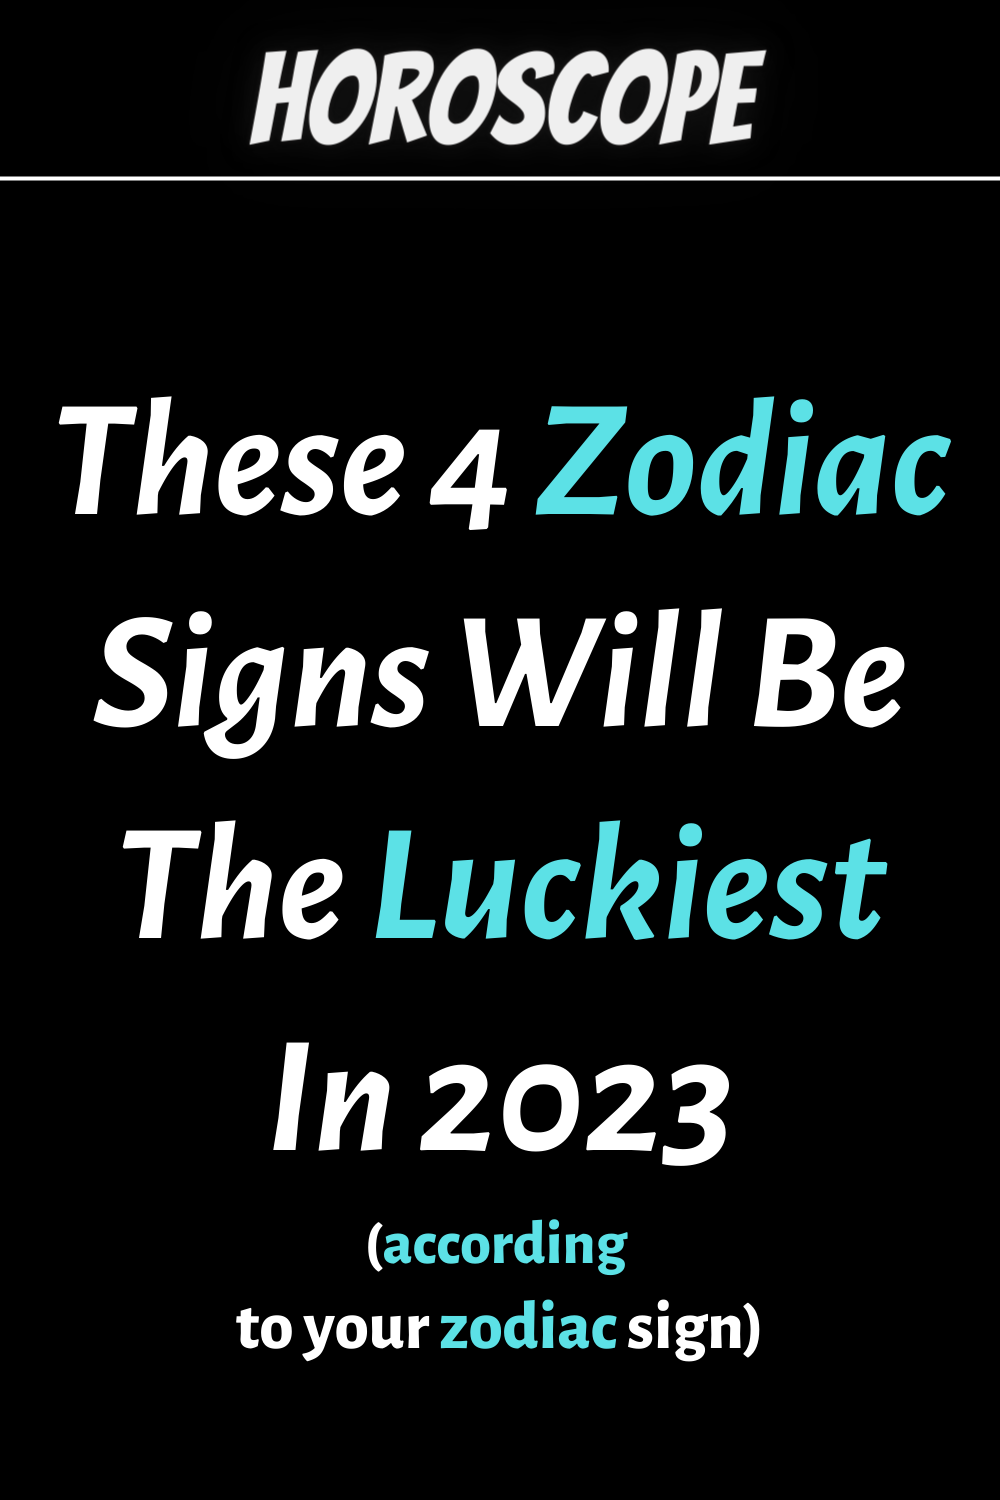 These 4 Zodiac Signs Will Be The Luckiest In 2023